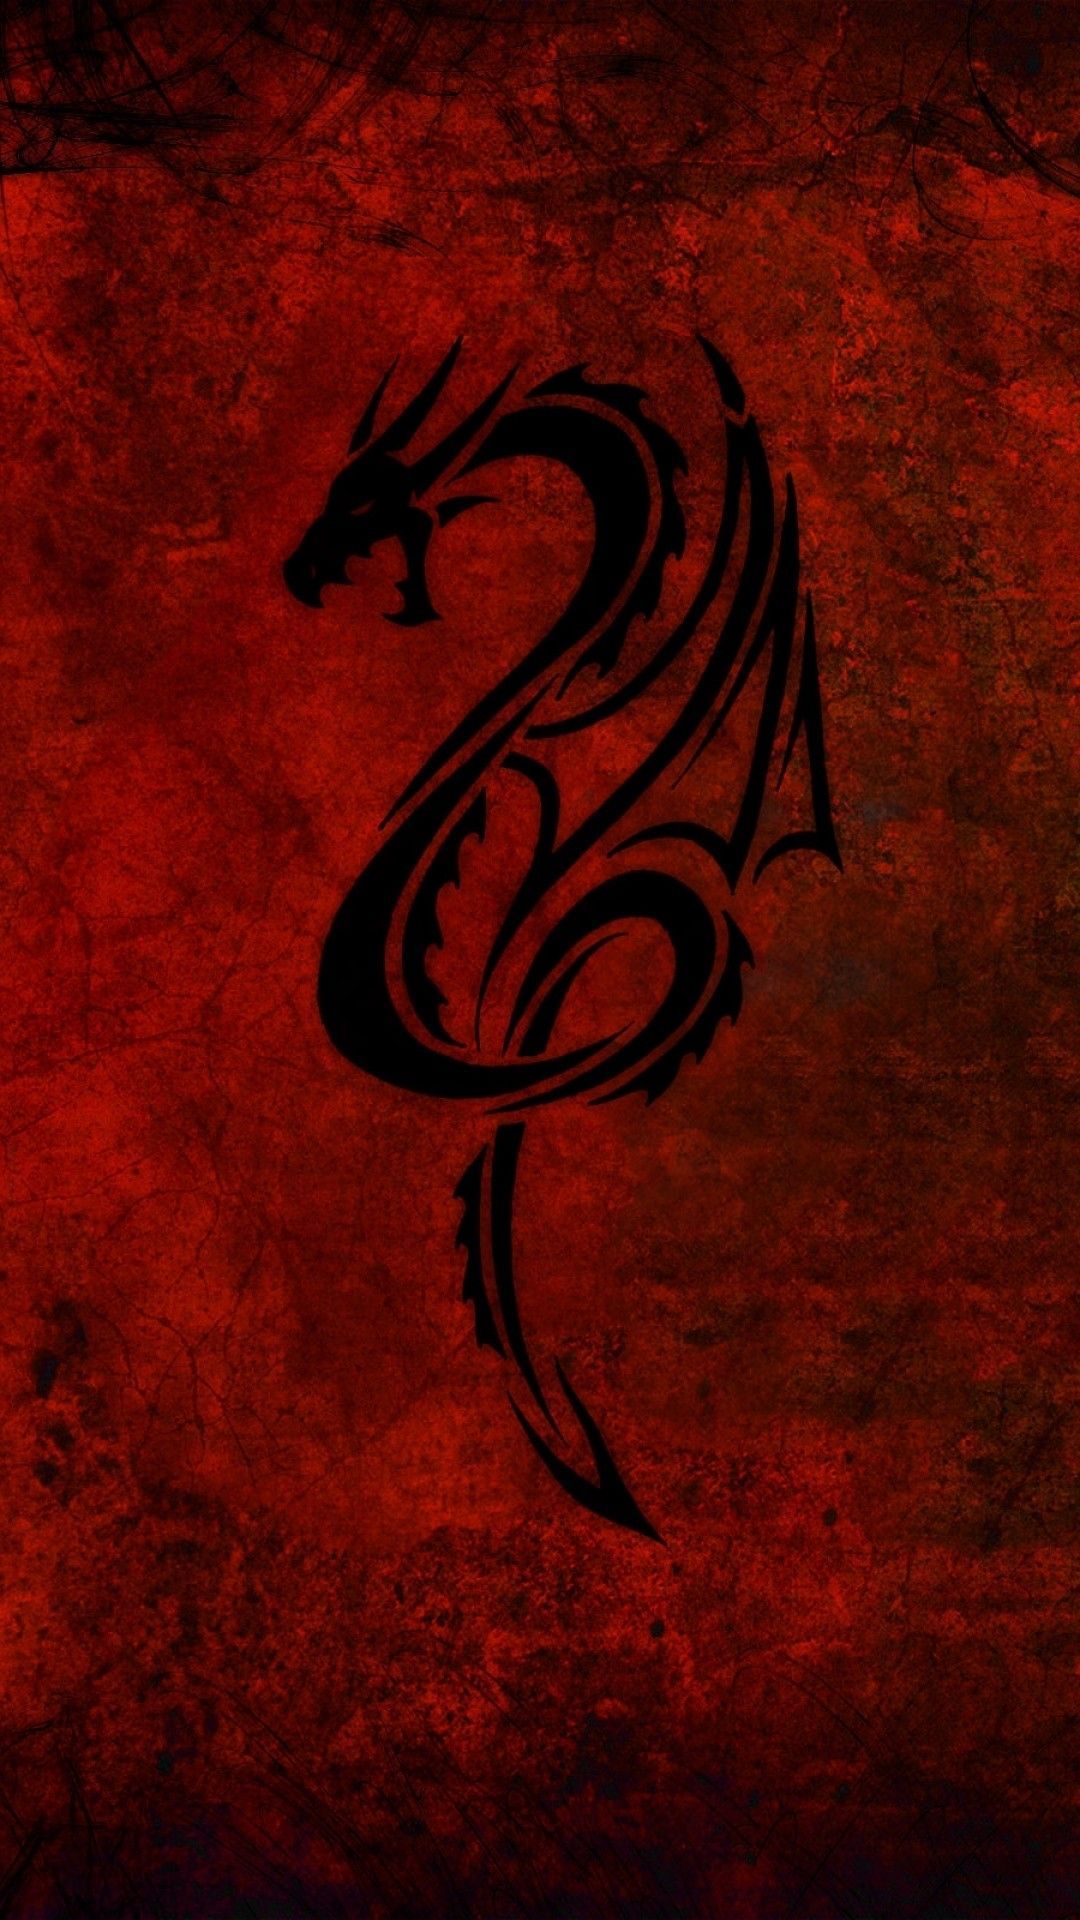 Red Dragon Wallpaper HD, iPhone, Desktop HD Background / Wallpaper (1080p, 4k) HD Wallpaper (Desktop Background / Android / iPhone) (1080p, 4k) (1080x1920) (2021)